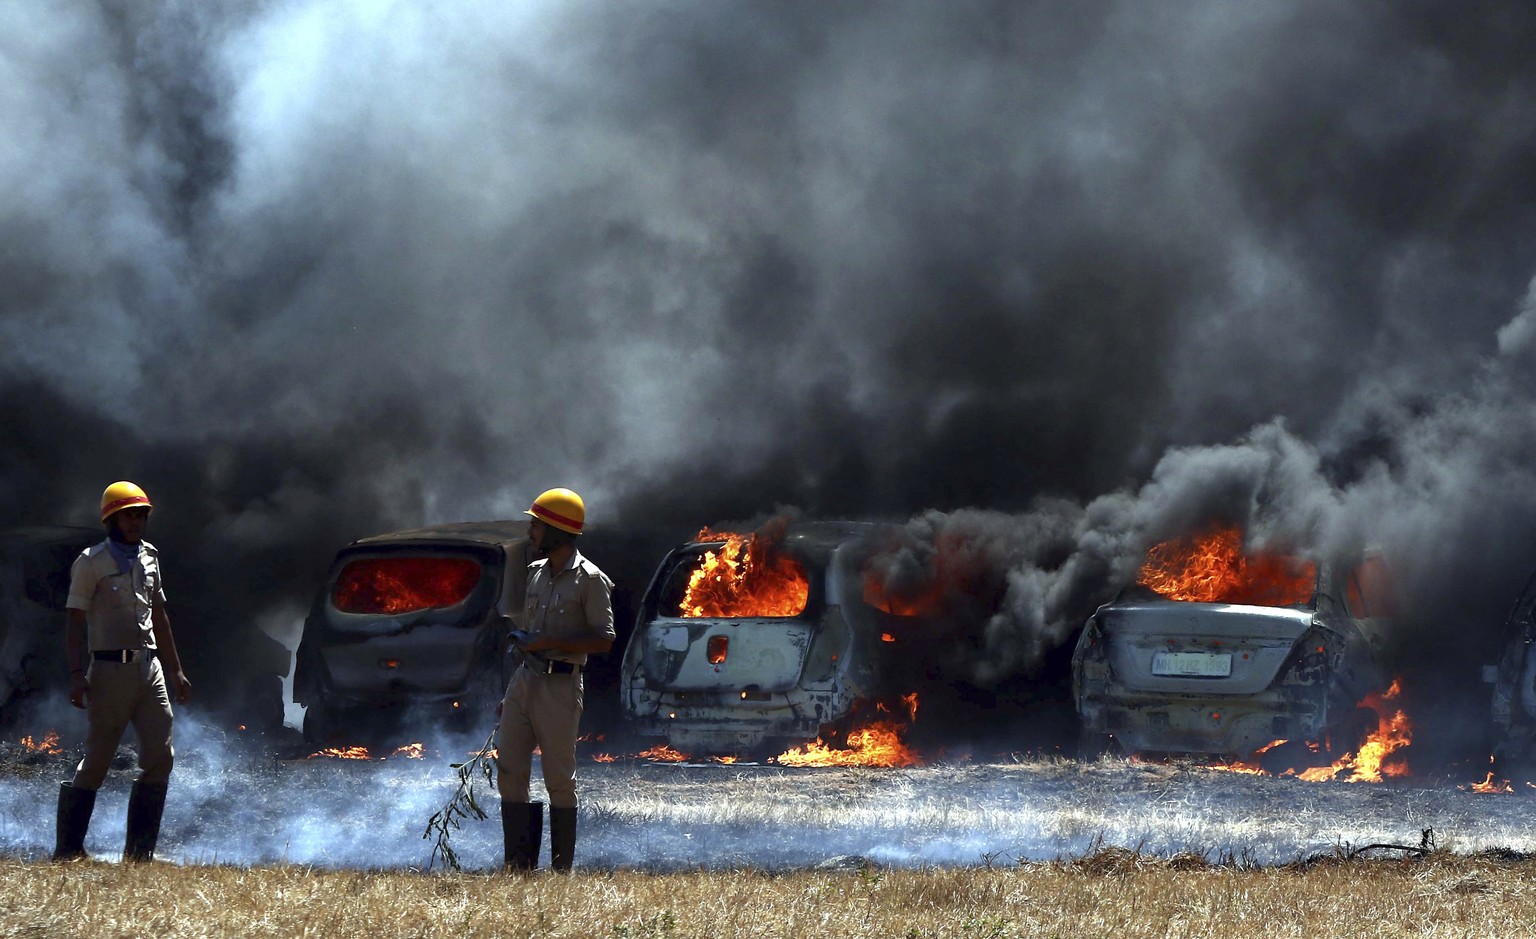 Firefighters stand next to burning cars after a fire broke out in a parking area outside Yelahanka air base, the venue of Aero India 2019 in Bangalore, India, Saturday, Feb. 23, 2019. The cause of the ...